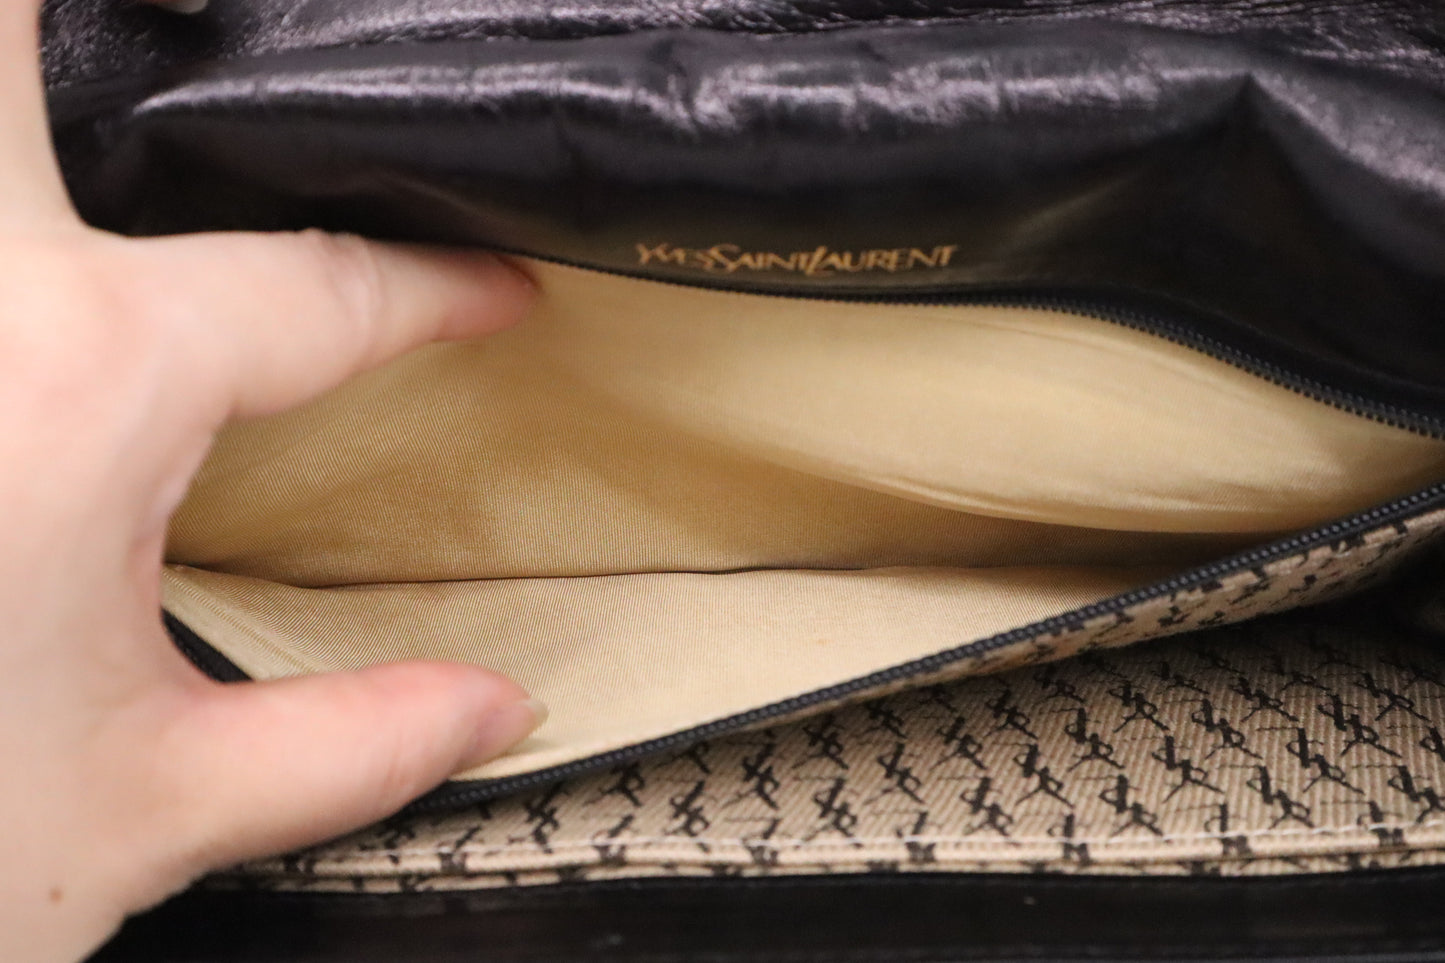 YSL Saint Laurent Clutch in Black Quilted Leather